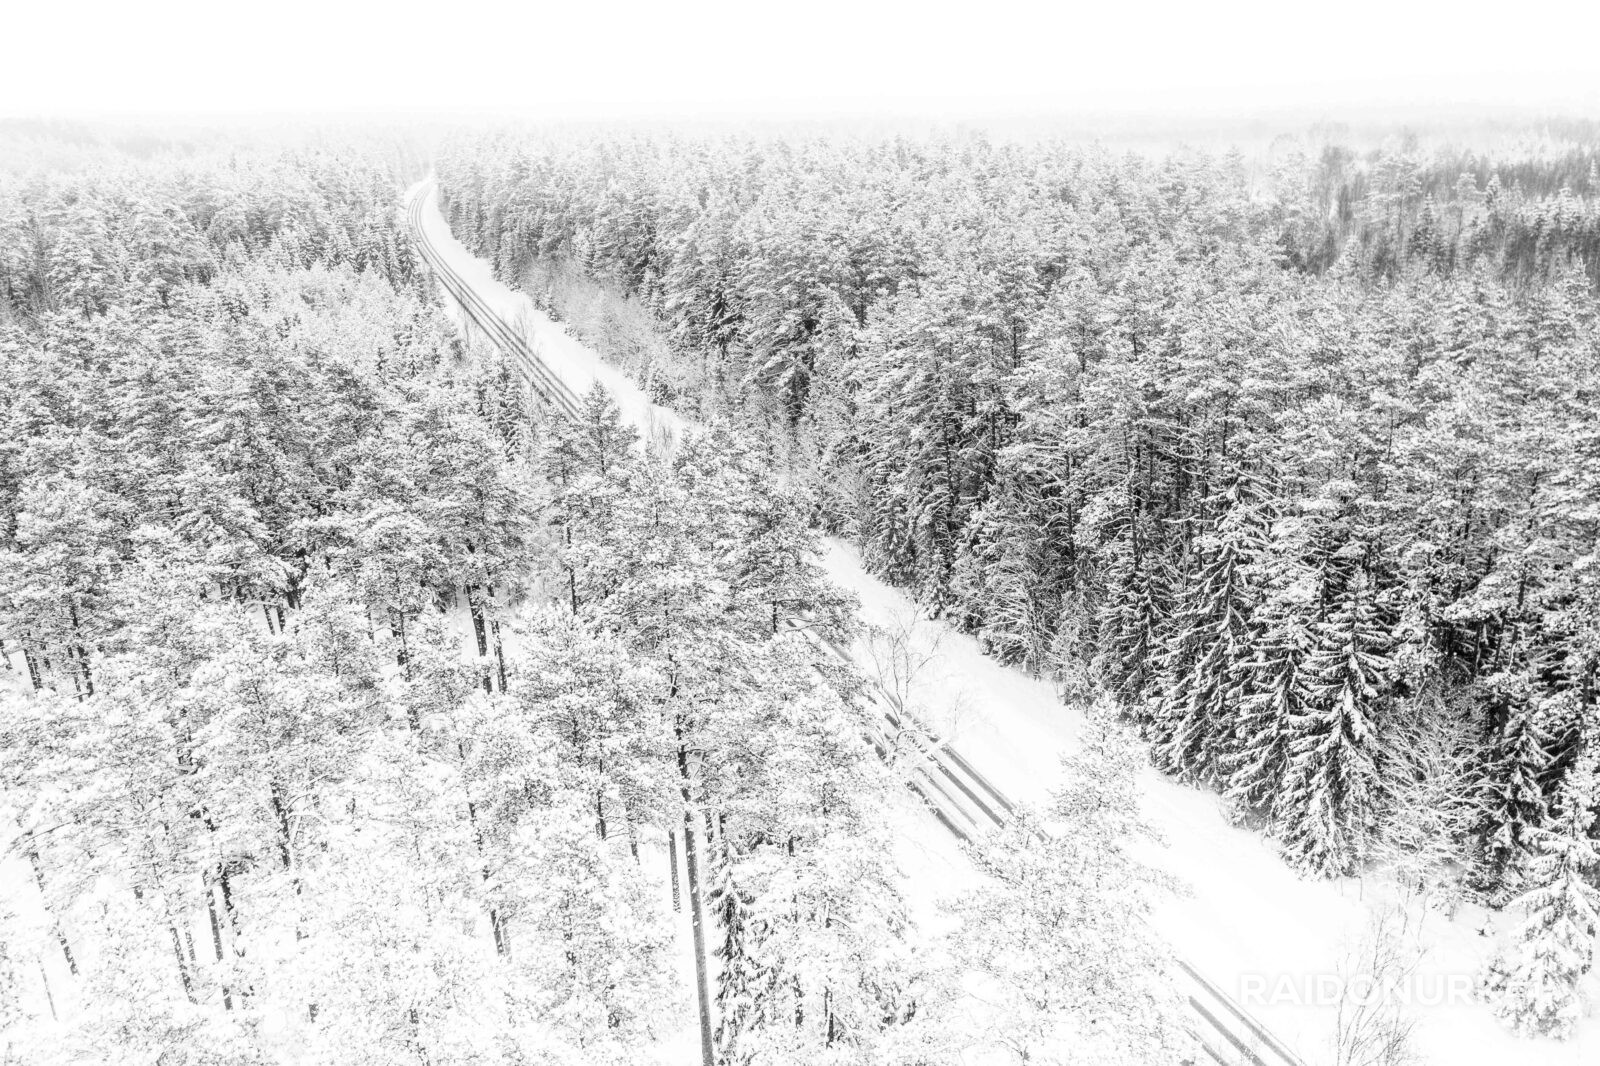 Estonia, winter, snow, snowy trees, forest, winter forest